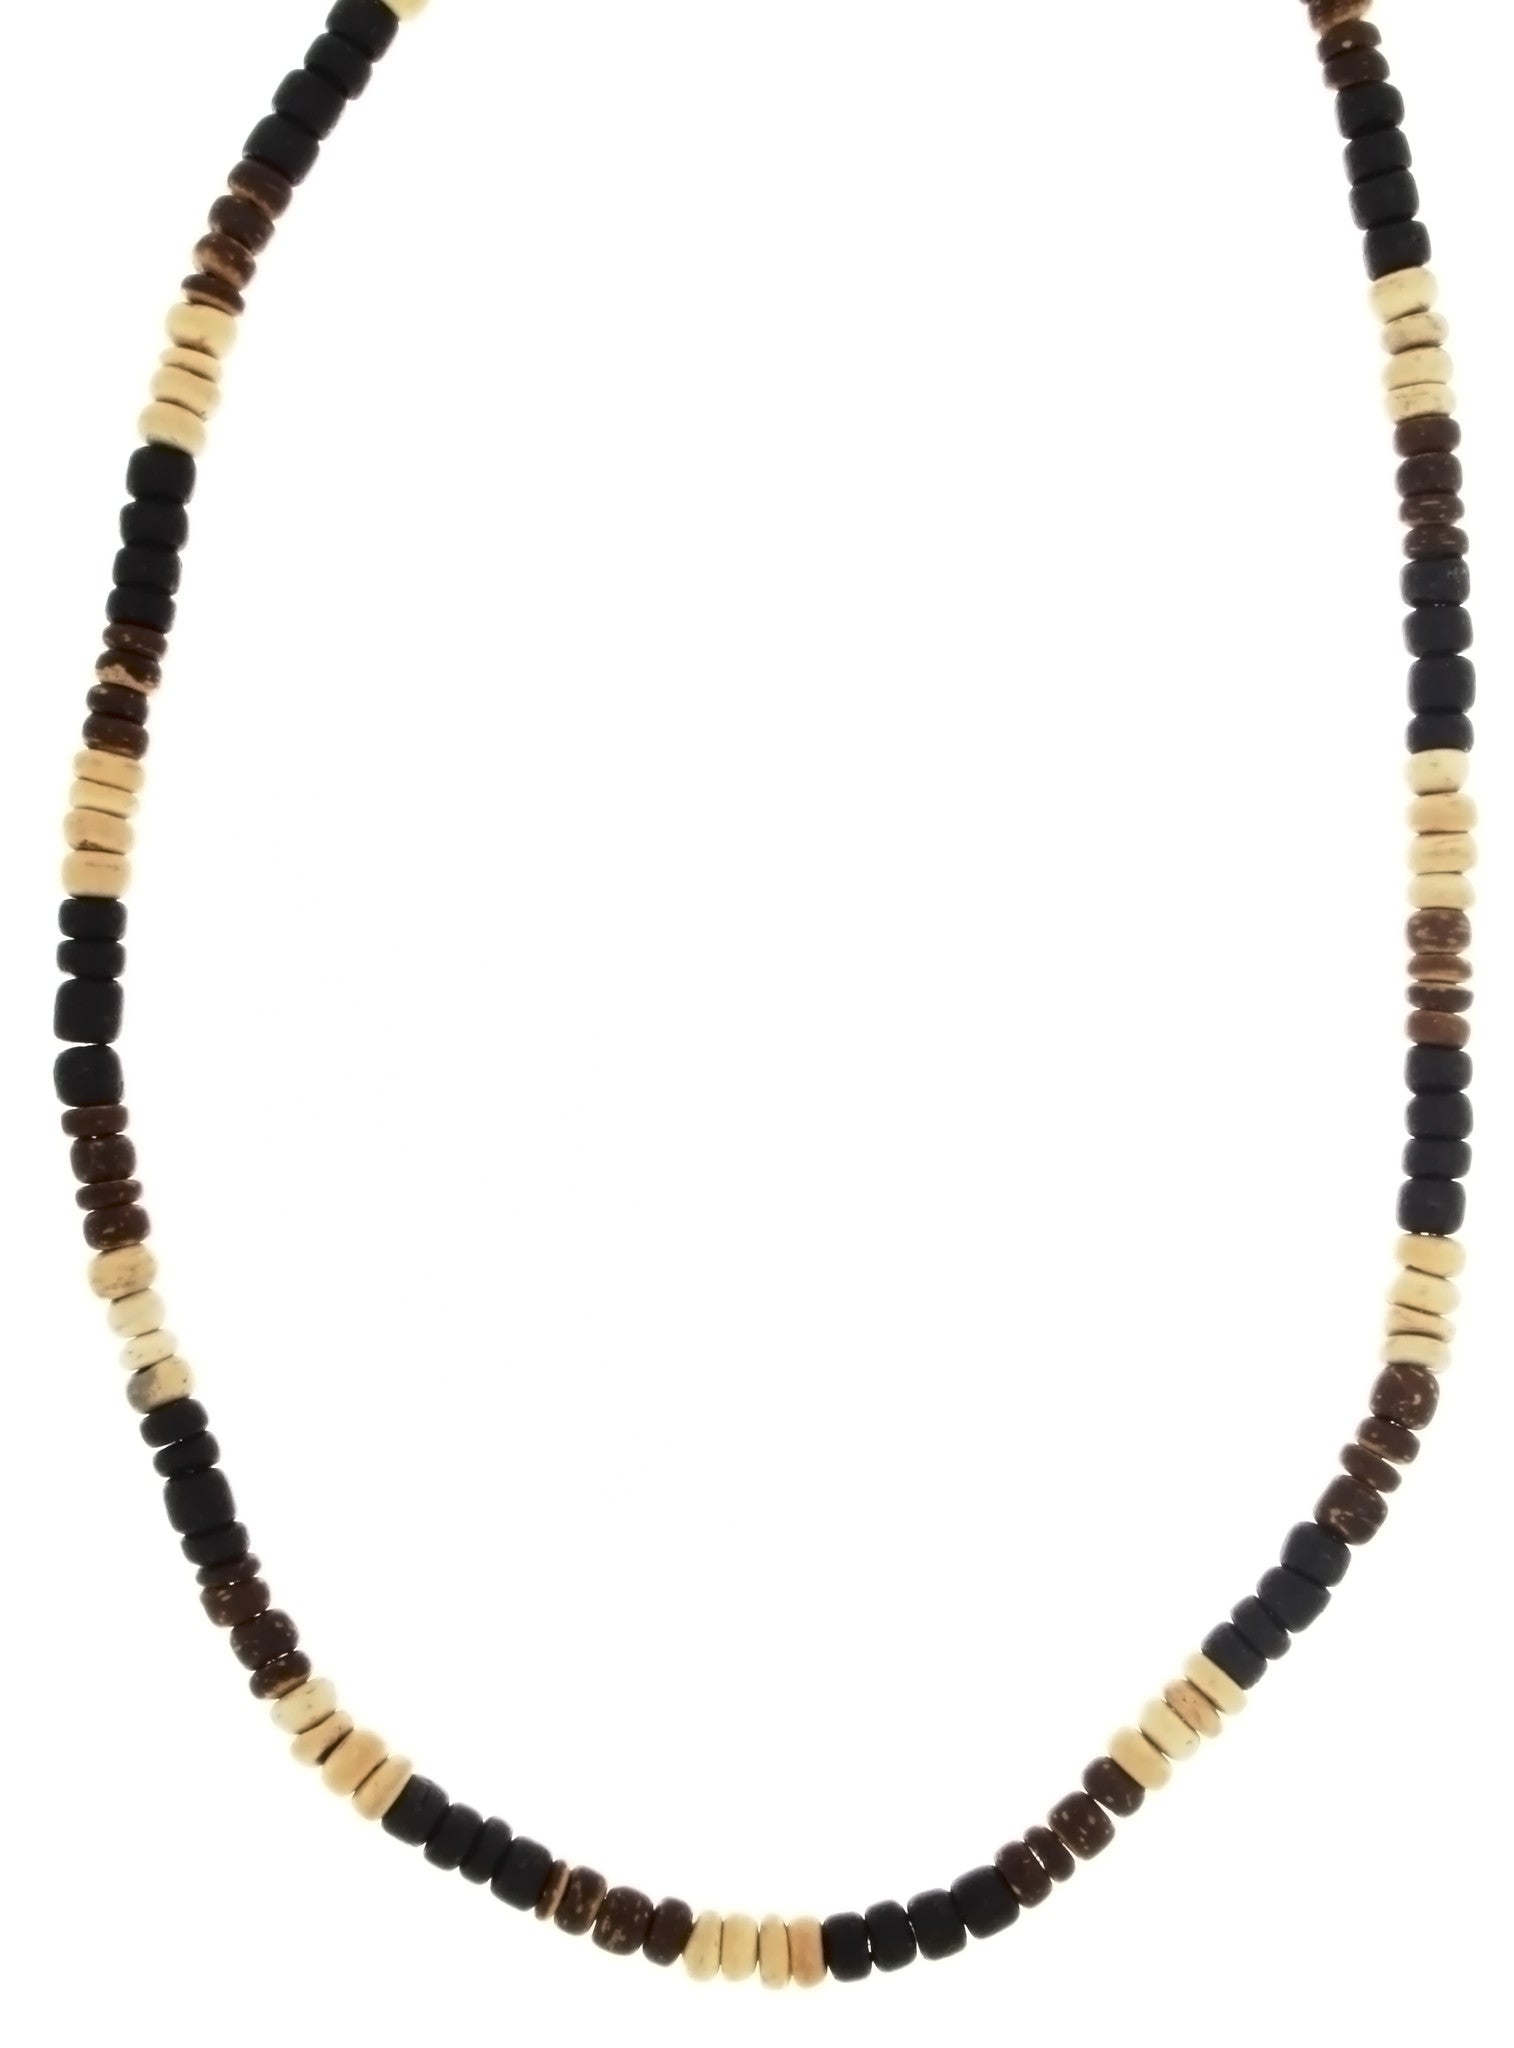 BEADED NATURAL WOOD COCO HEISEI NECKLACE